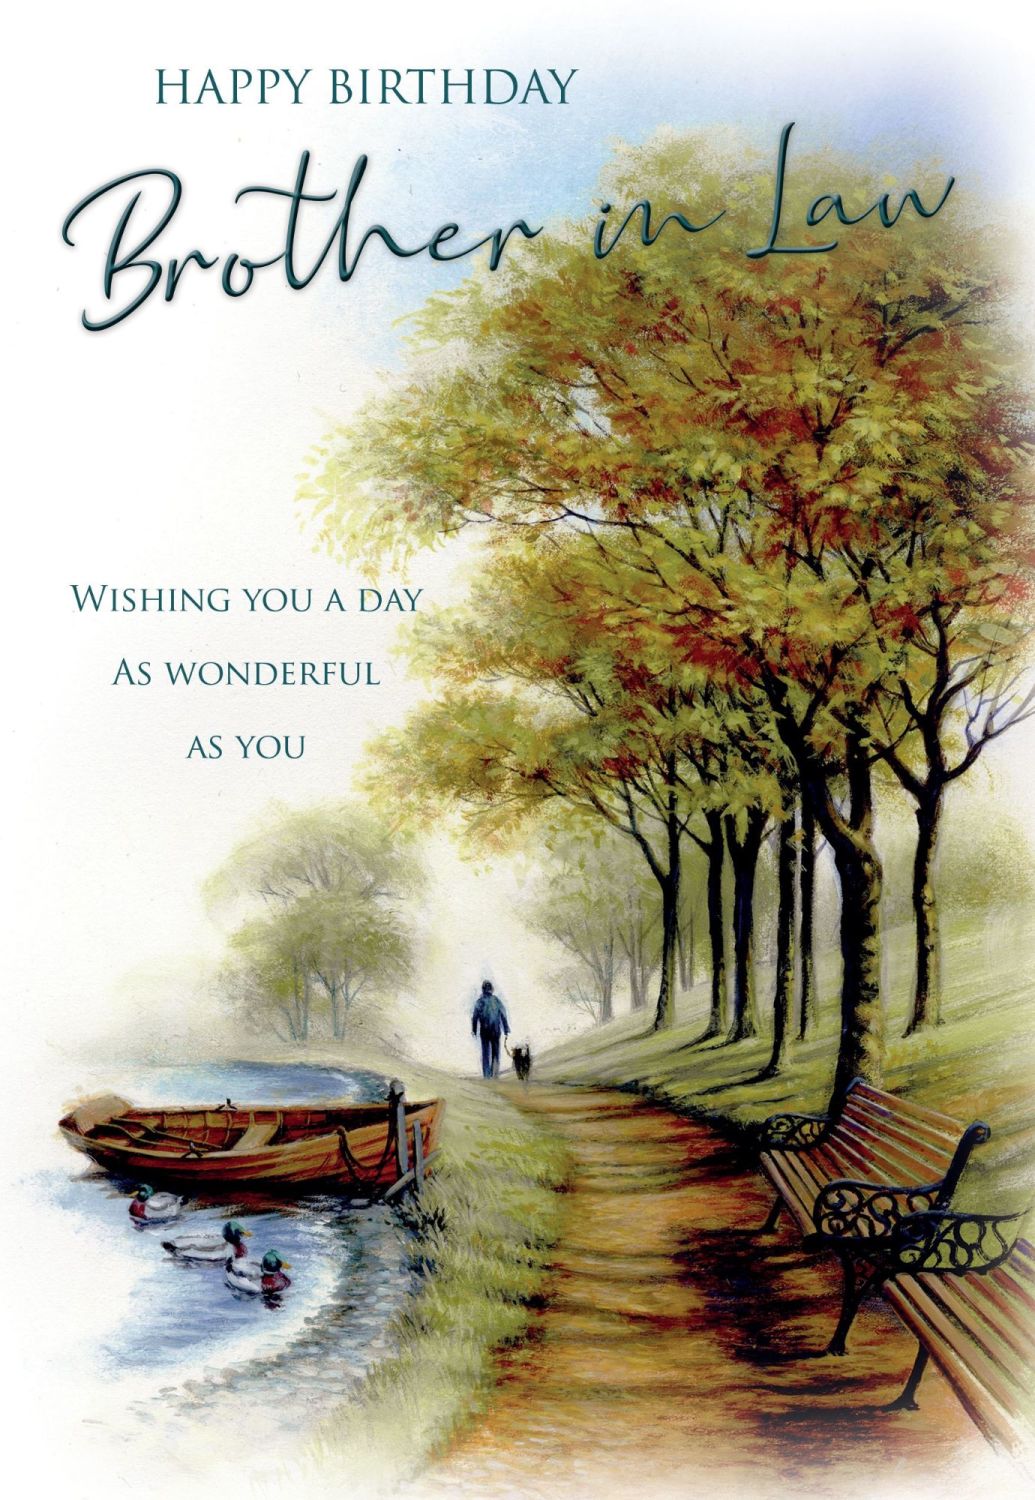 Happy Birthday Brother In Law - BROTHER In LAW BIRTHDAY Cards - A WALK In T